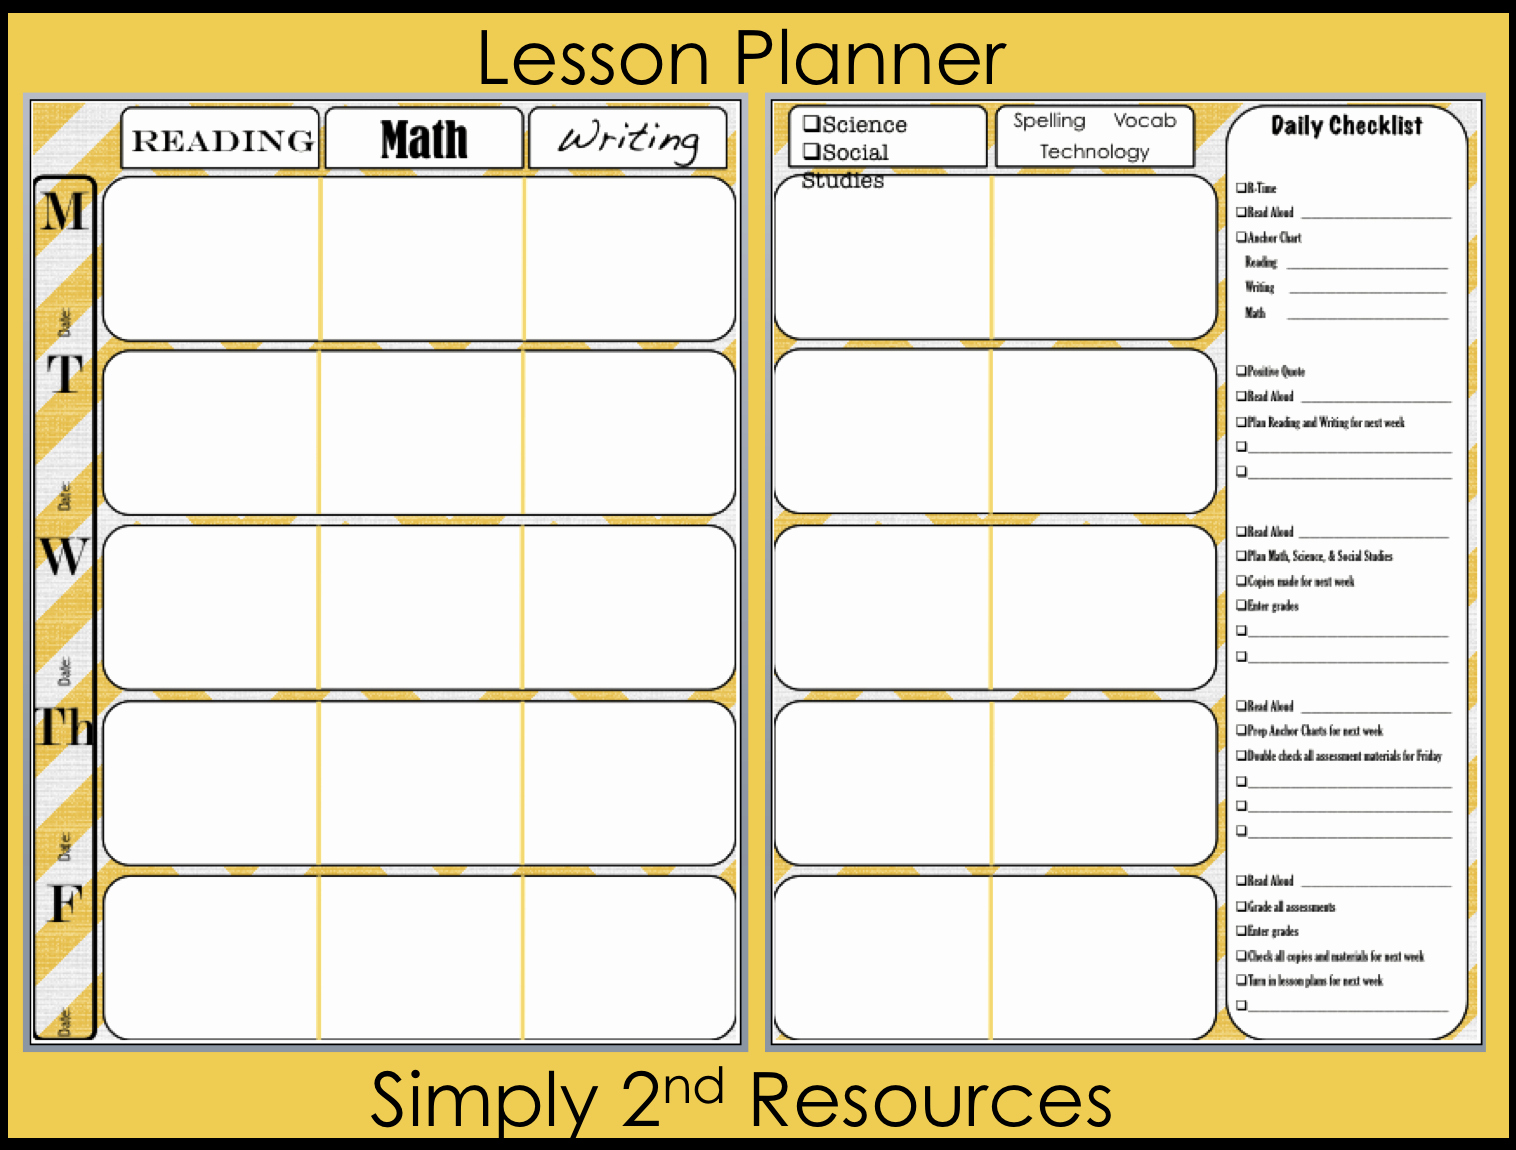 Simply 2nd Resources Lesson Plan Template so Excited to